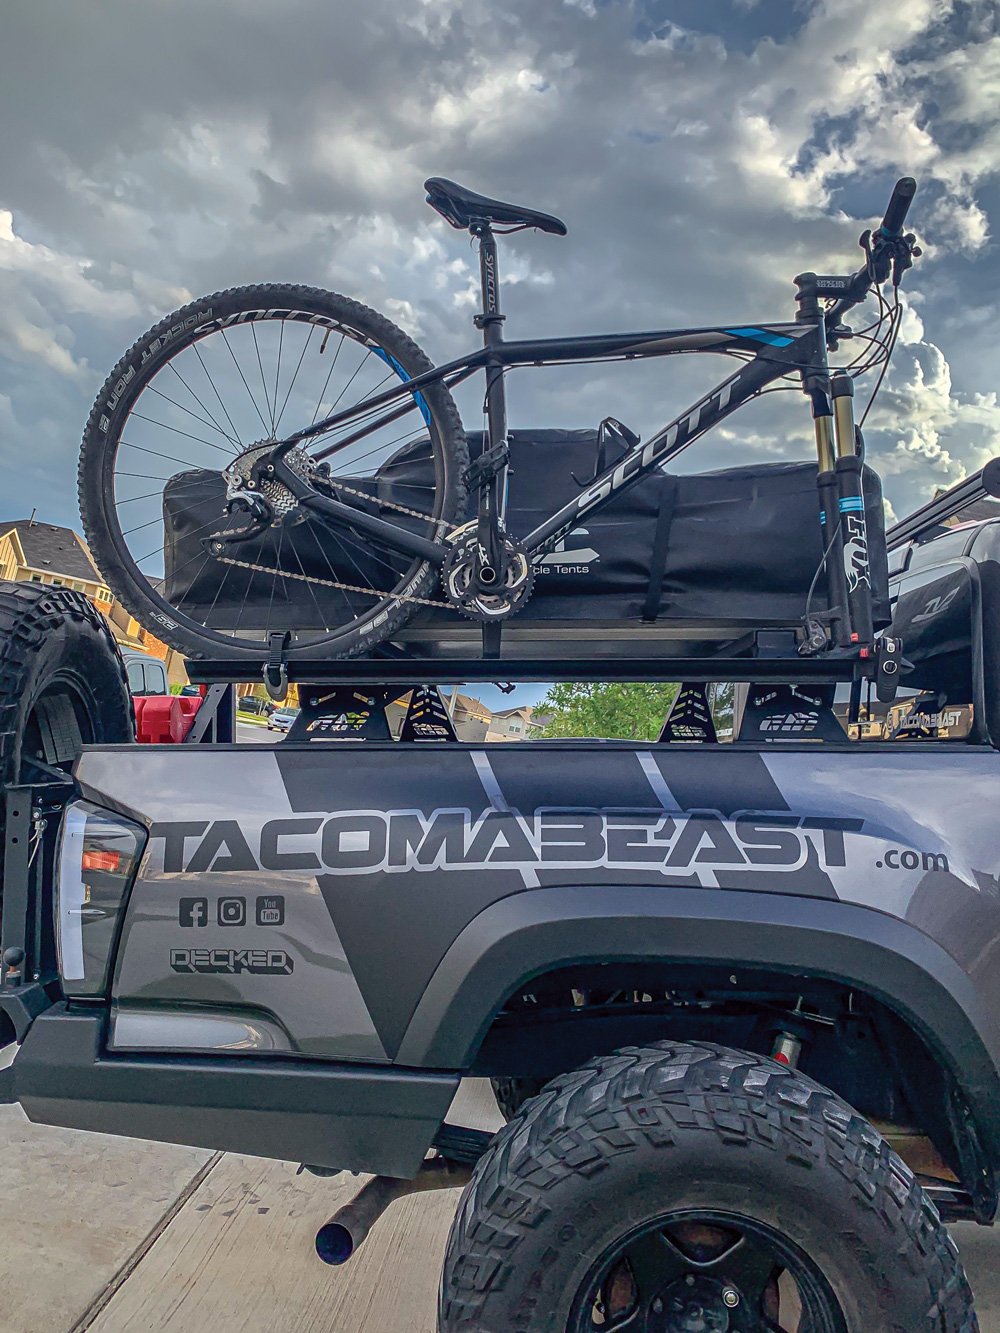 This Tacoma is able to carry it all